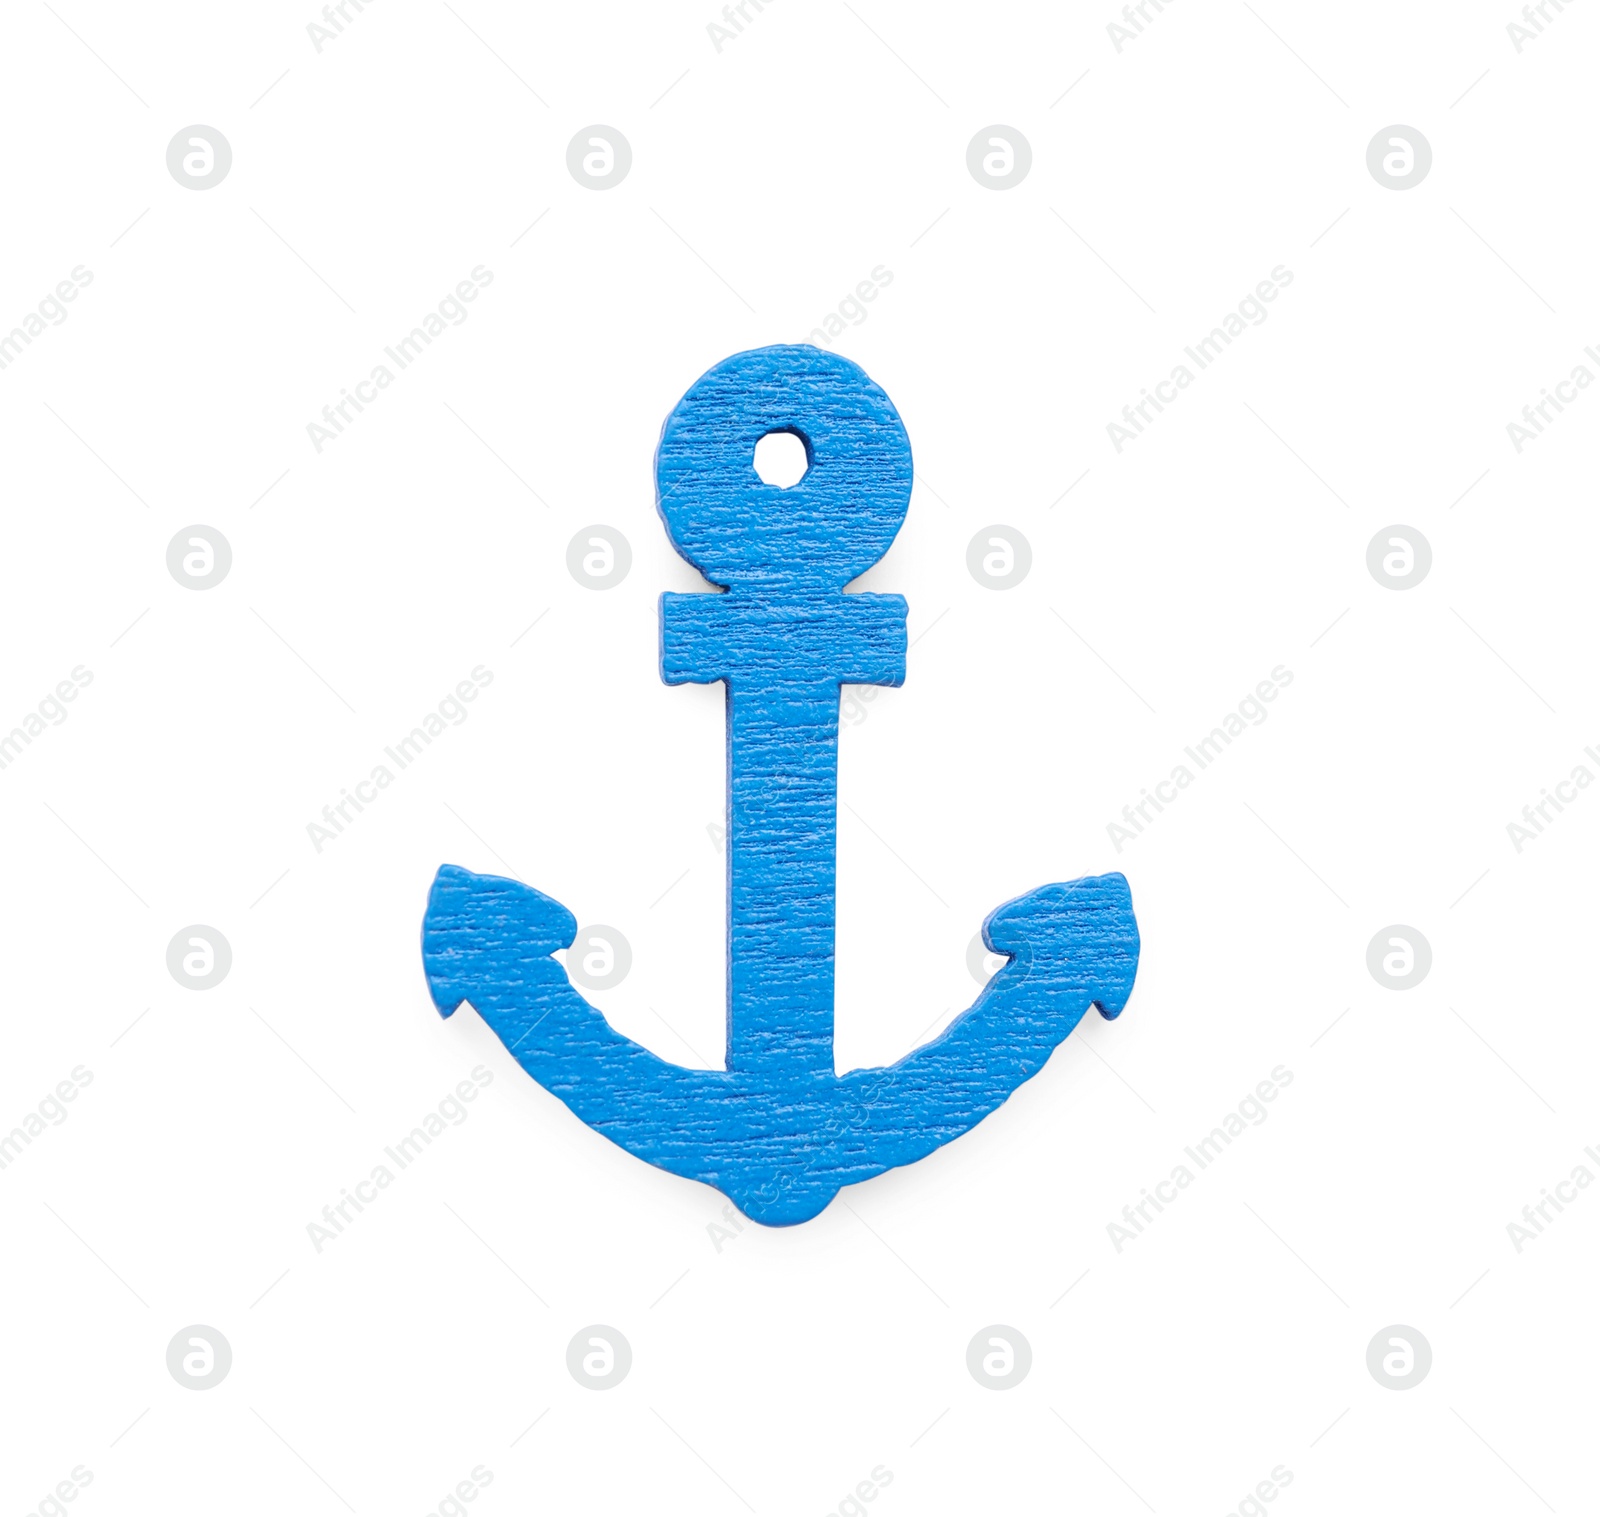 Photo of One light blue anchor figure isolated on white